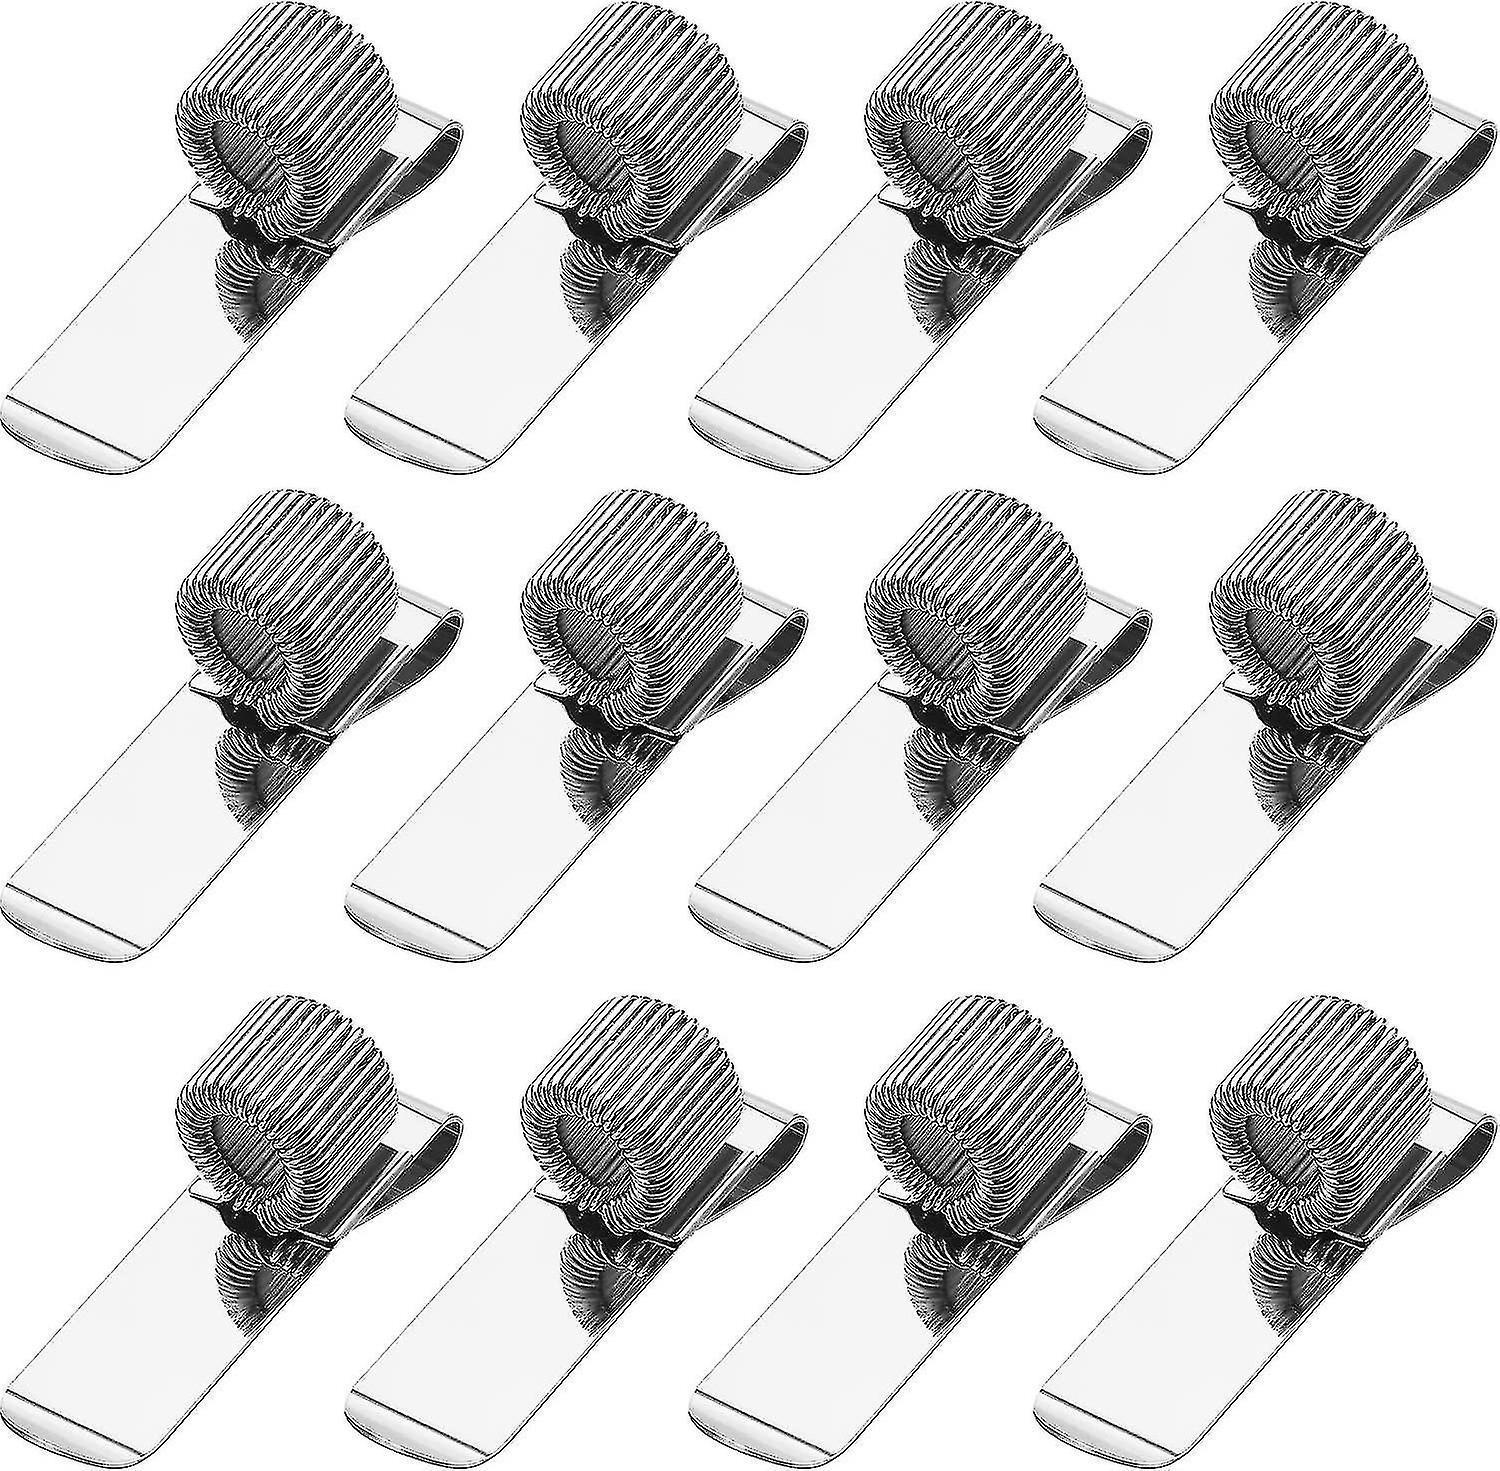 12 Pieces Pen Clipboard Holder Pen Clipboard Holder Manganese Steel Pen Clip Organizer For Notebook And Clipboard In Home, Office, Pocket